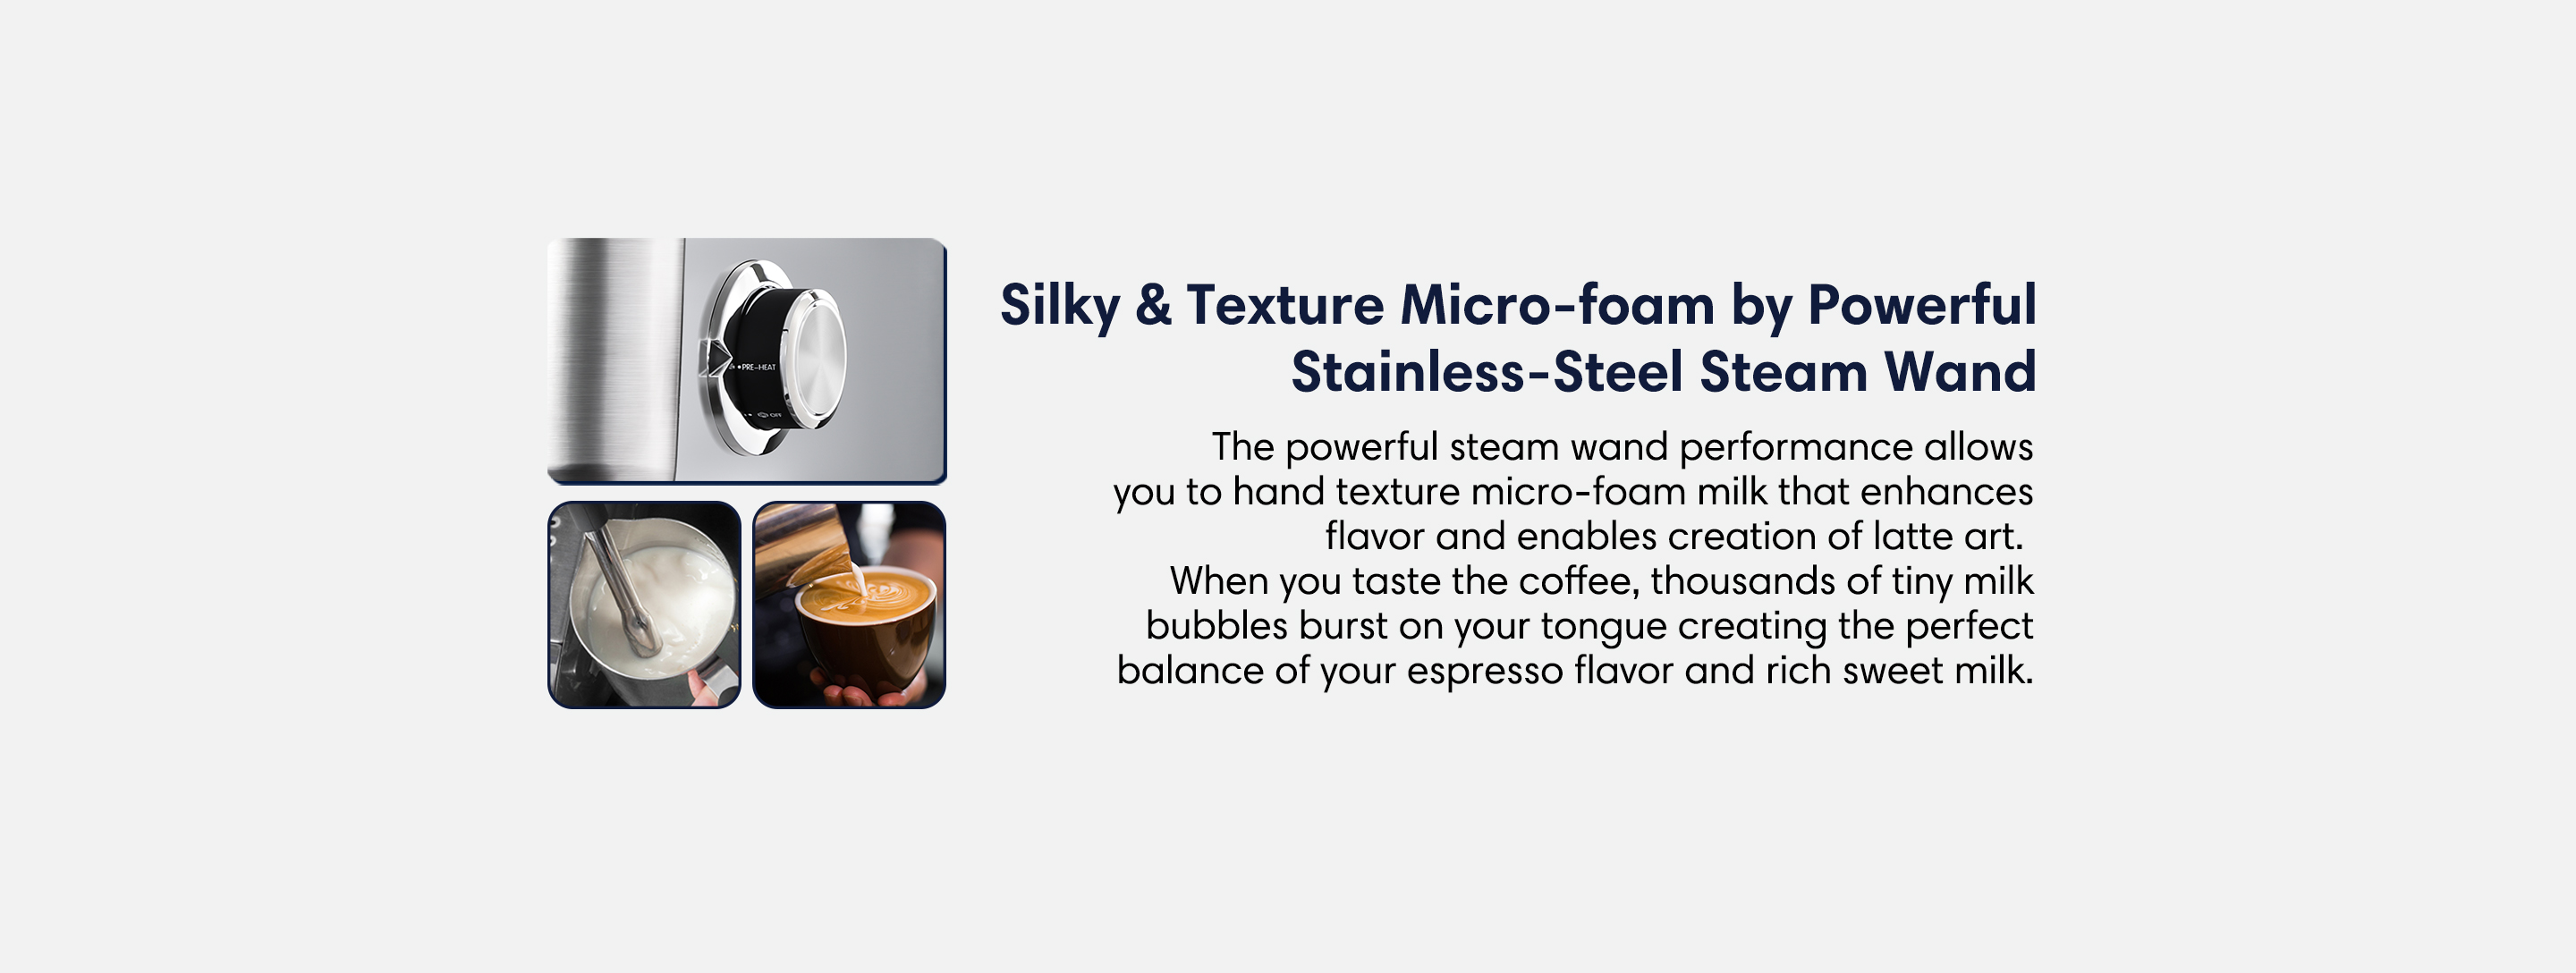 Silky and texture micro-foam the steam wand performance allows you to hand texture micro-foam that enhances flavor and enables creation of latte art.